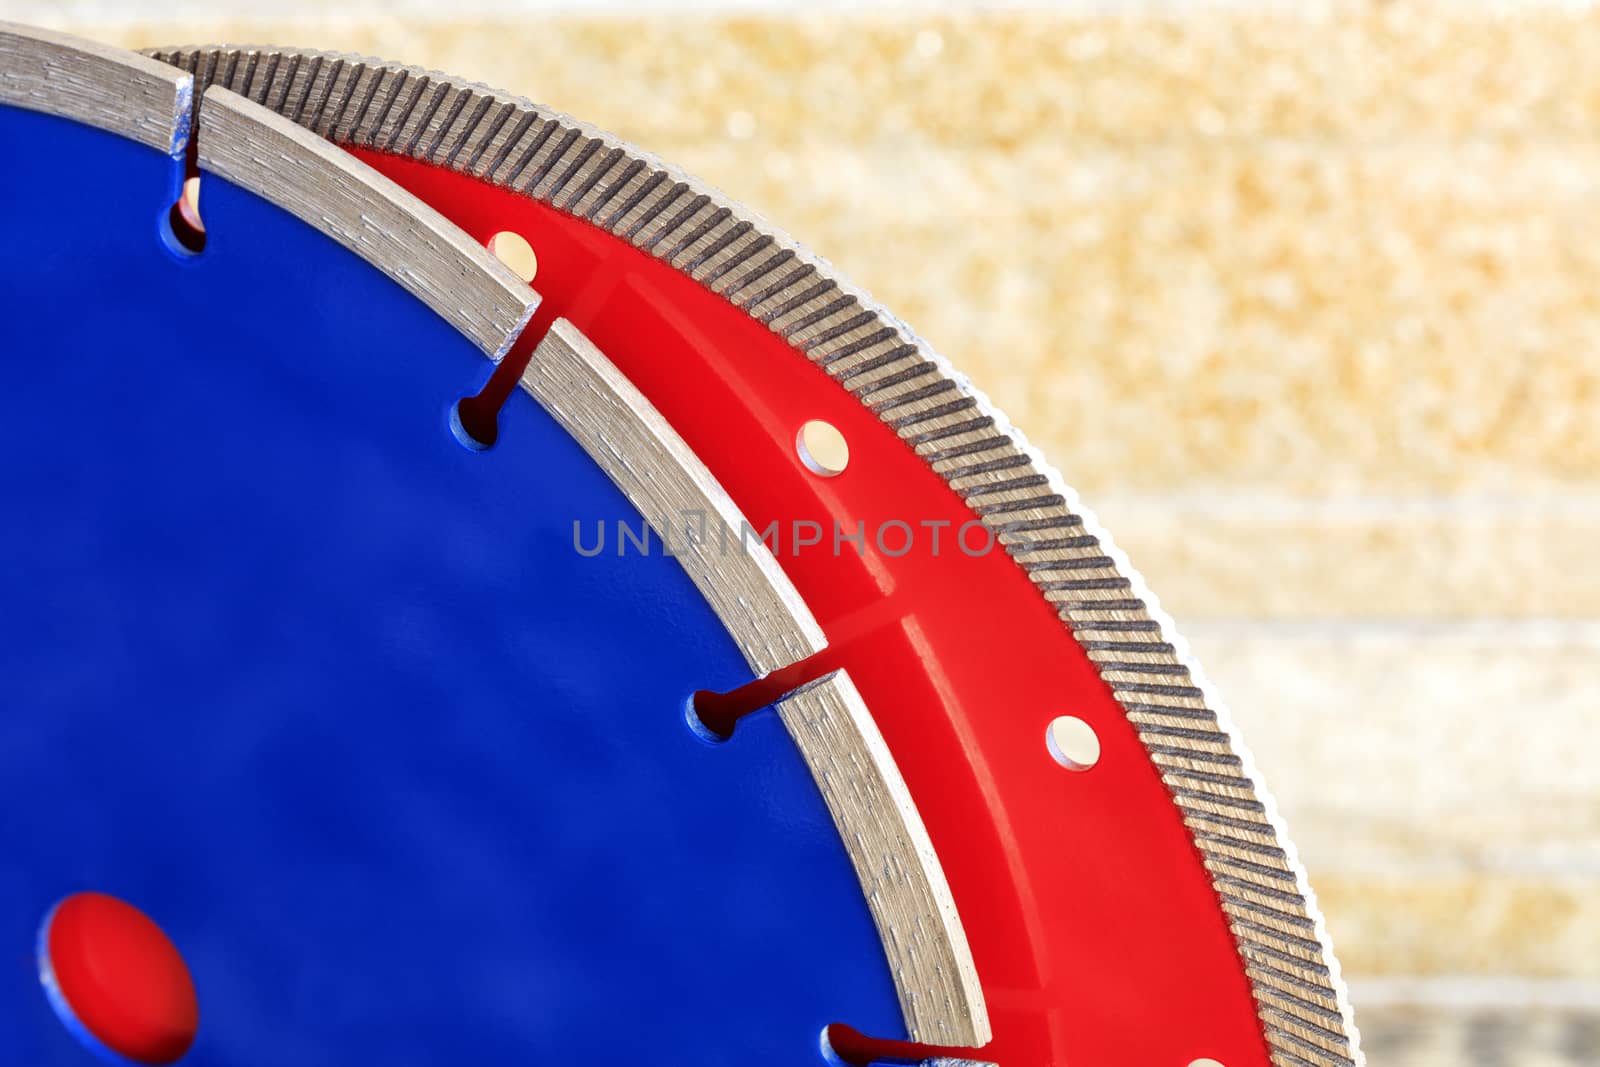 Red diamond circle for granite and stone, blue for concrete, reinforced concrete against a background of orange-gold sandstone wall.